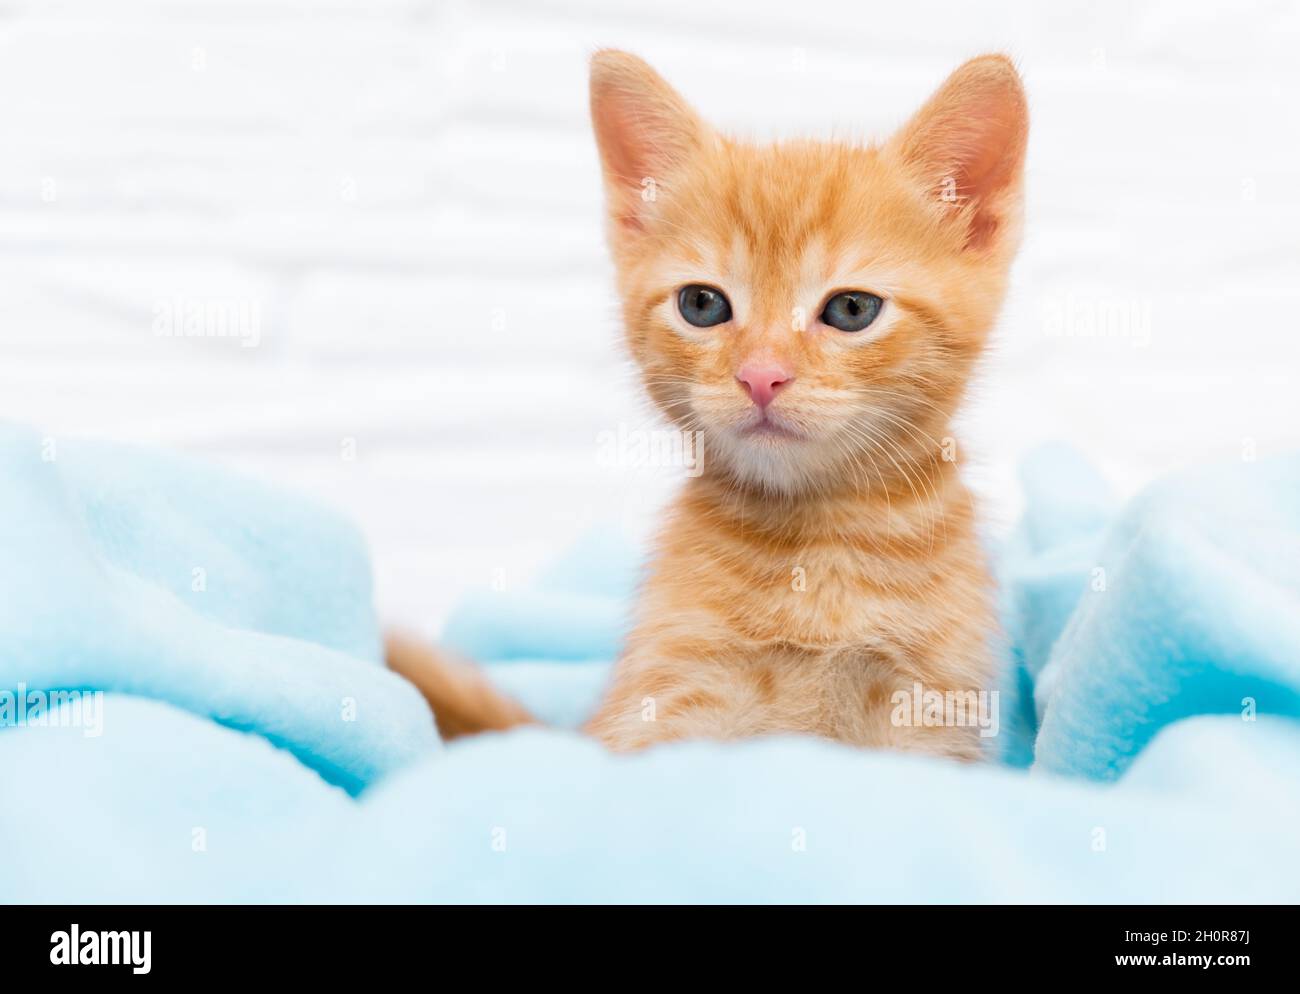 Close up ginger tabby curious kitten sits in a blue blanket and looks around. Pets concept Stock Photo